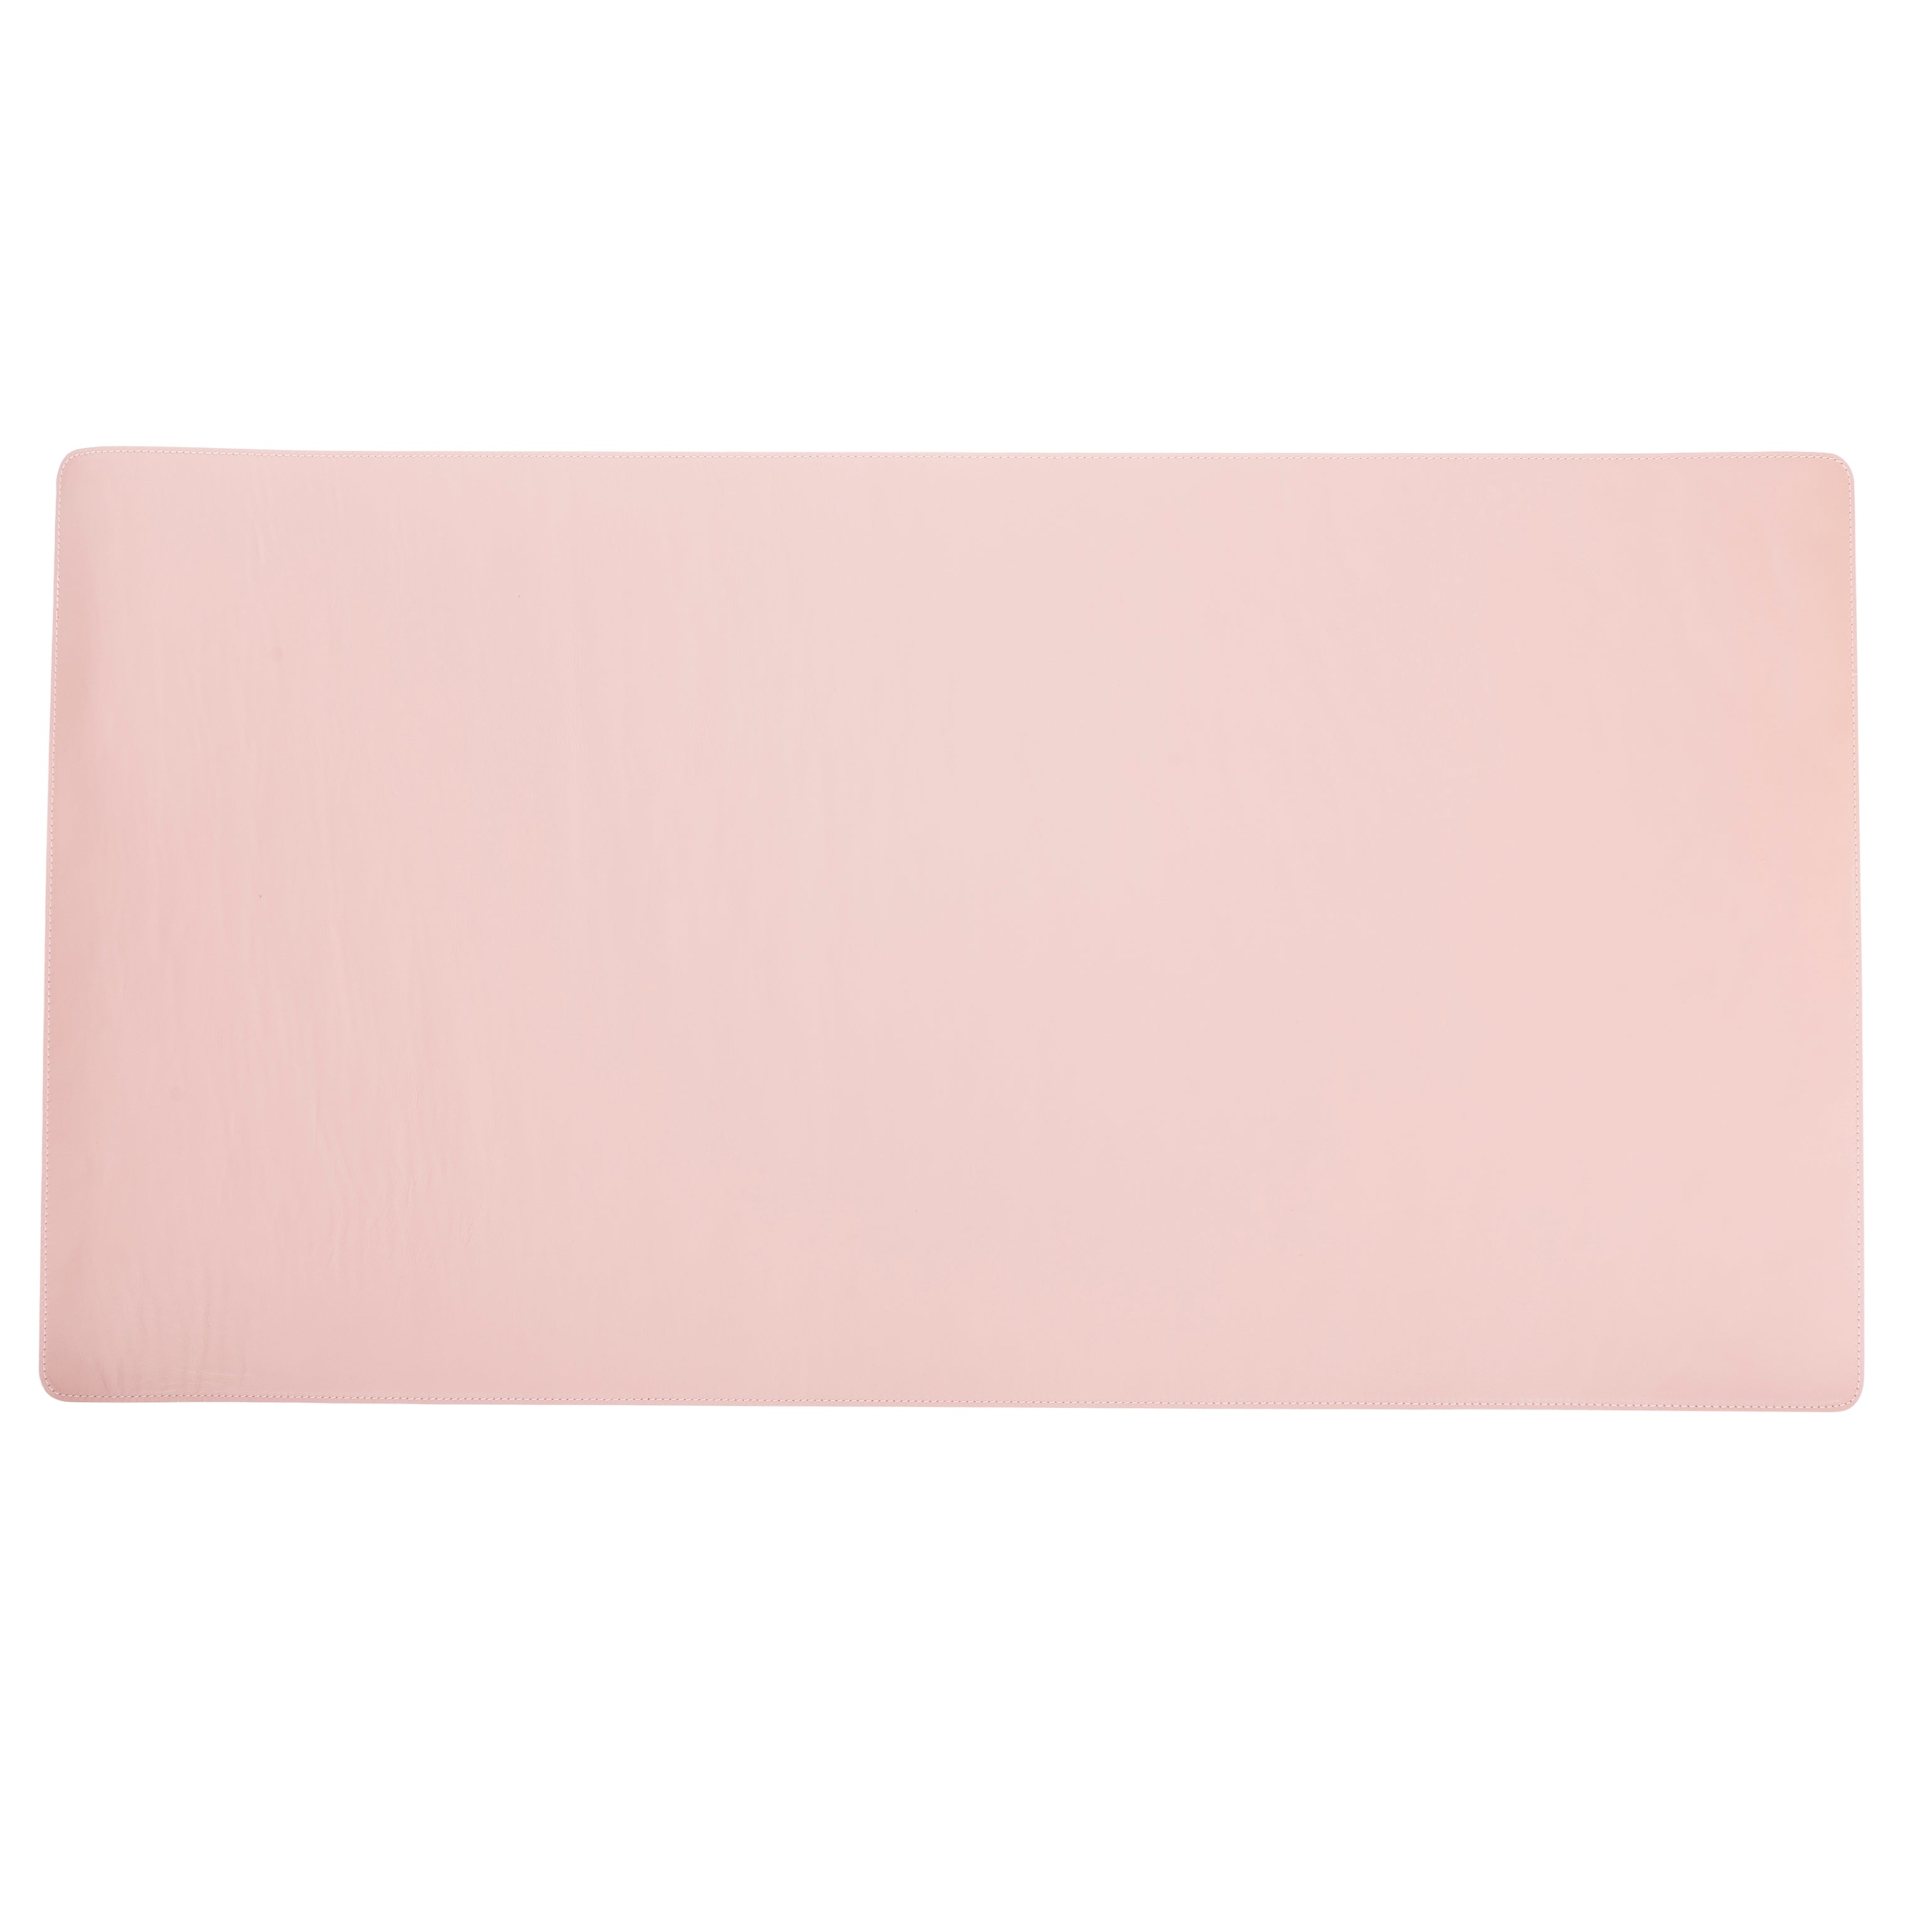 LupinnyLeather Genuine Leather Deskmat, Computer Pad, Office Desk Pad (Pink Nude) 8